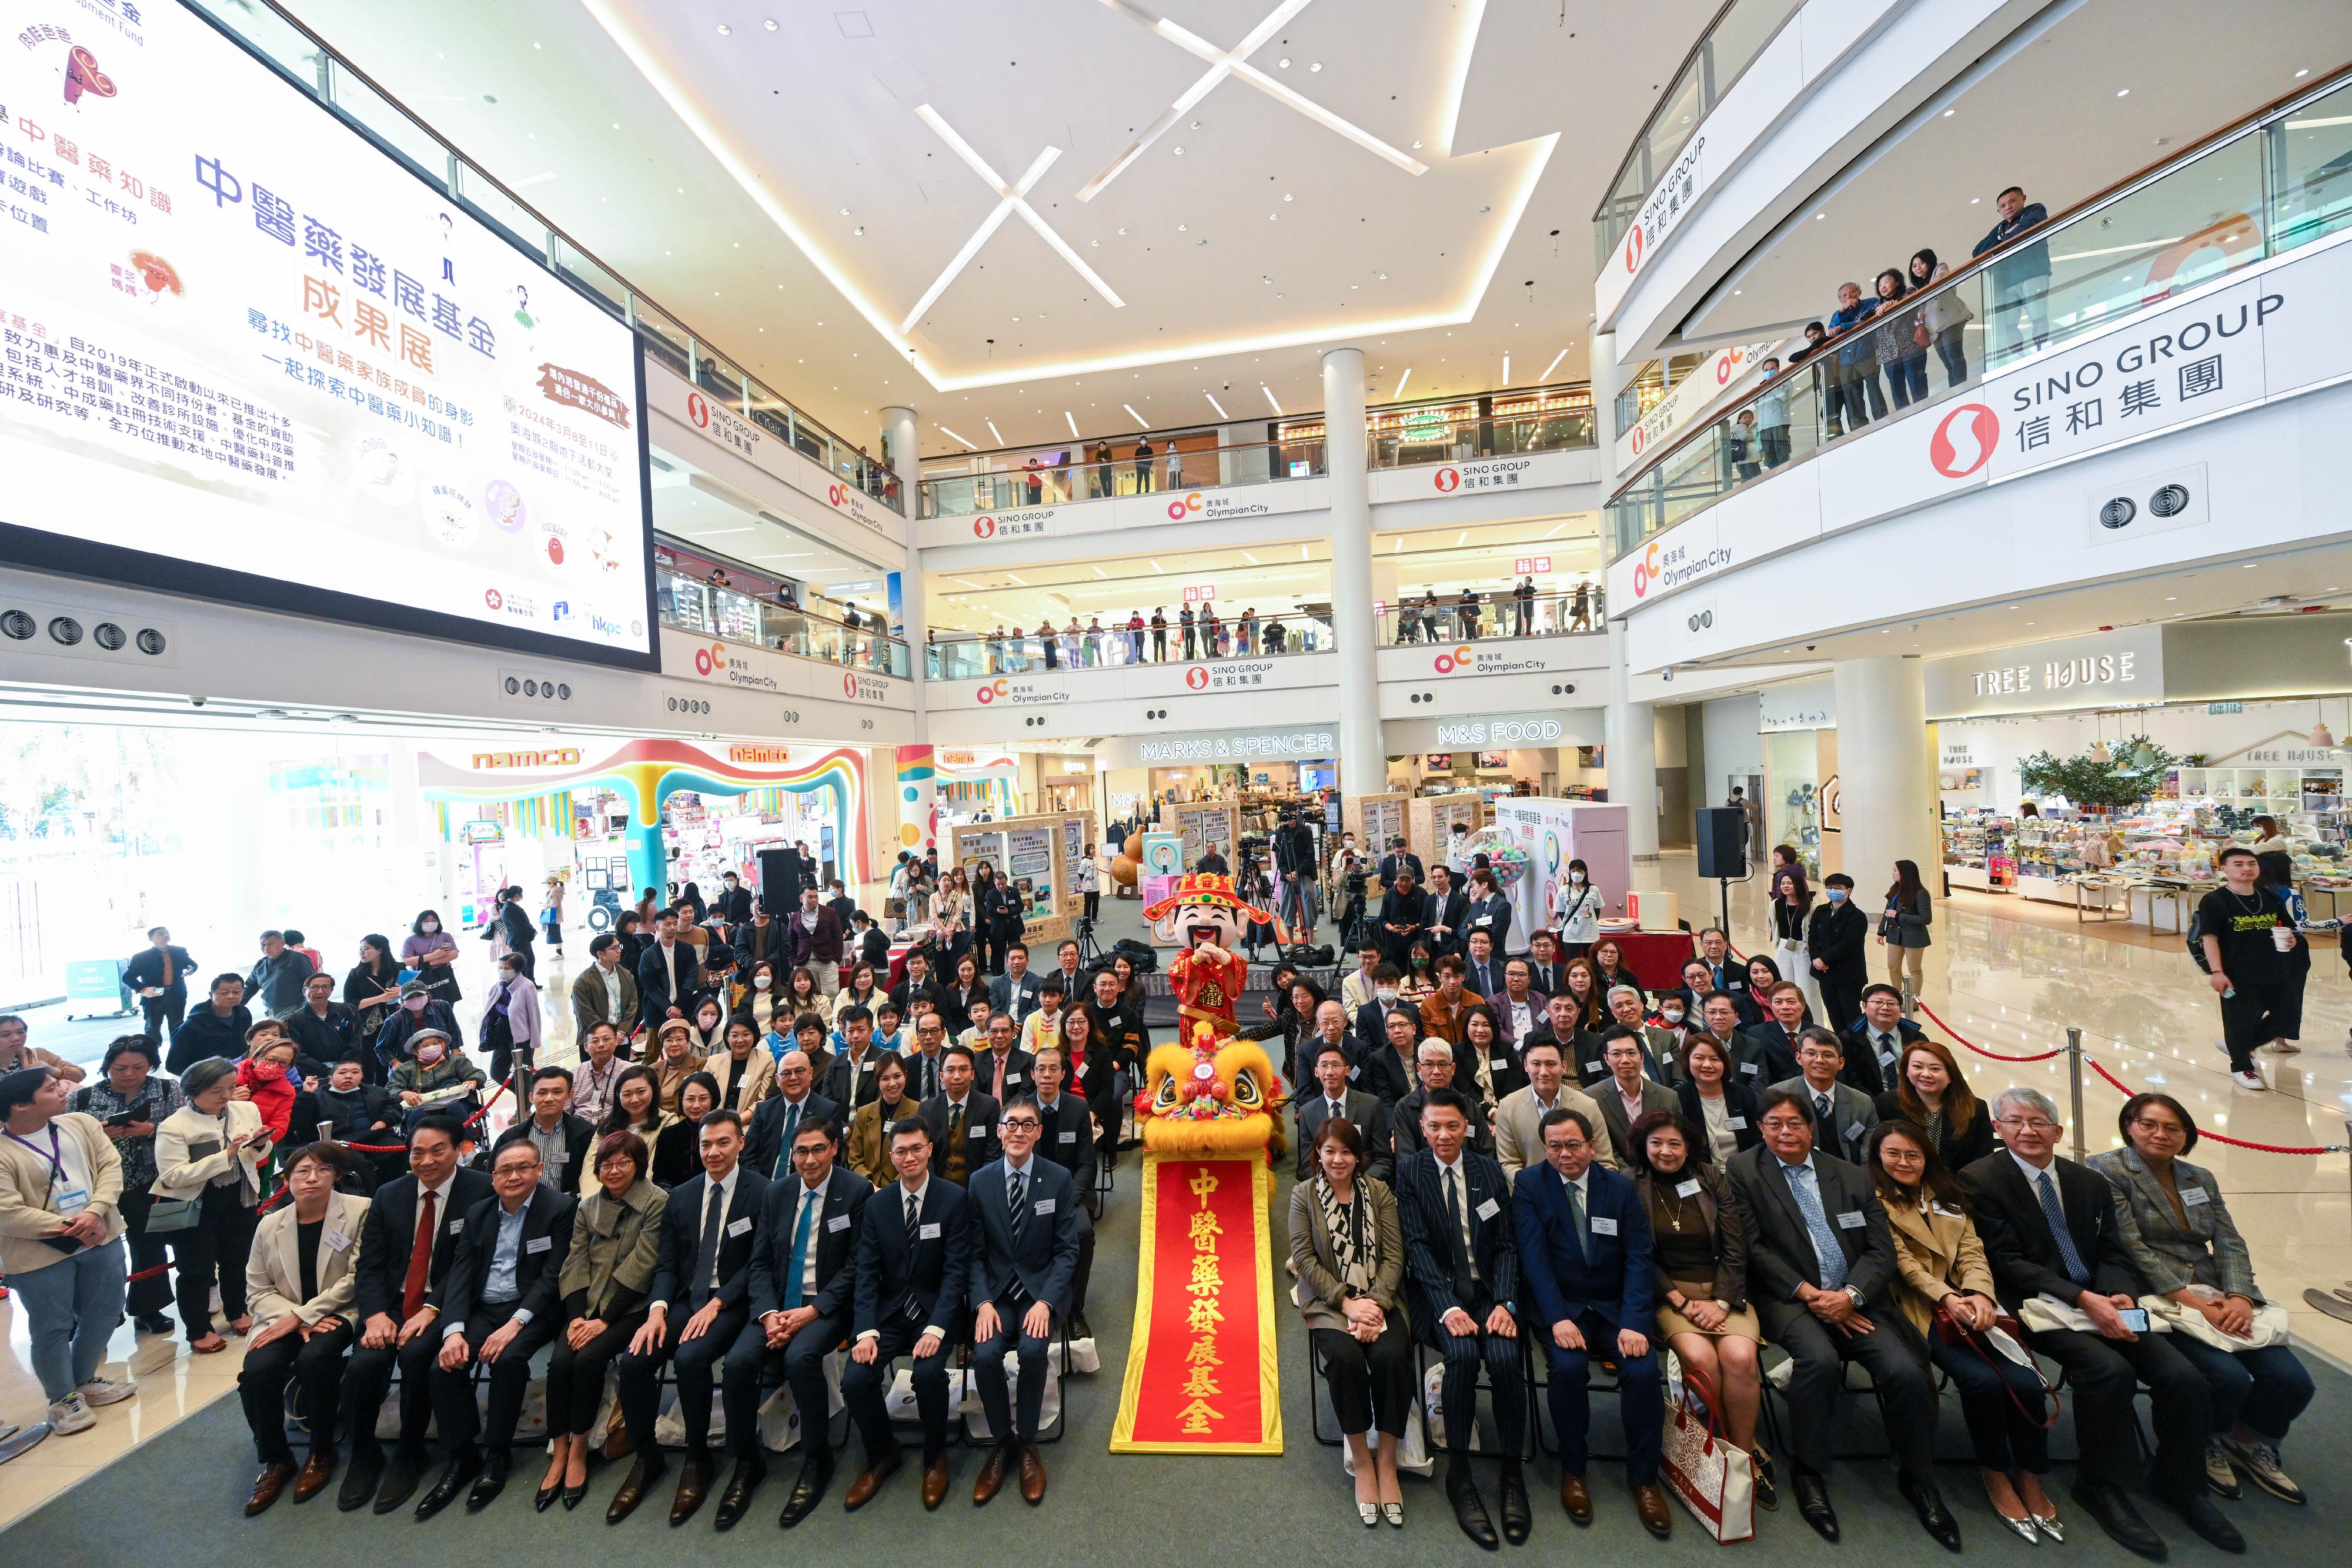 The showcase event of the Chinese Medicine Development Fund (CMDF) opened today (March 8). The Under Secretary for Health, Dr Libby Lee (first row, eighth right); the Chairman of the Advisory Committee on CMDF, Professor Douglas So (first row, eighth left); the Chairman of the Hong Kong Productivity Council, Mr Sunny Tan (first row, seventh right); and the Acting Commissioner for Chinese Medicine Development of the Health Bureau, Mr Dominic Ho (first row, seventh left), and other guests show their support in person.